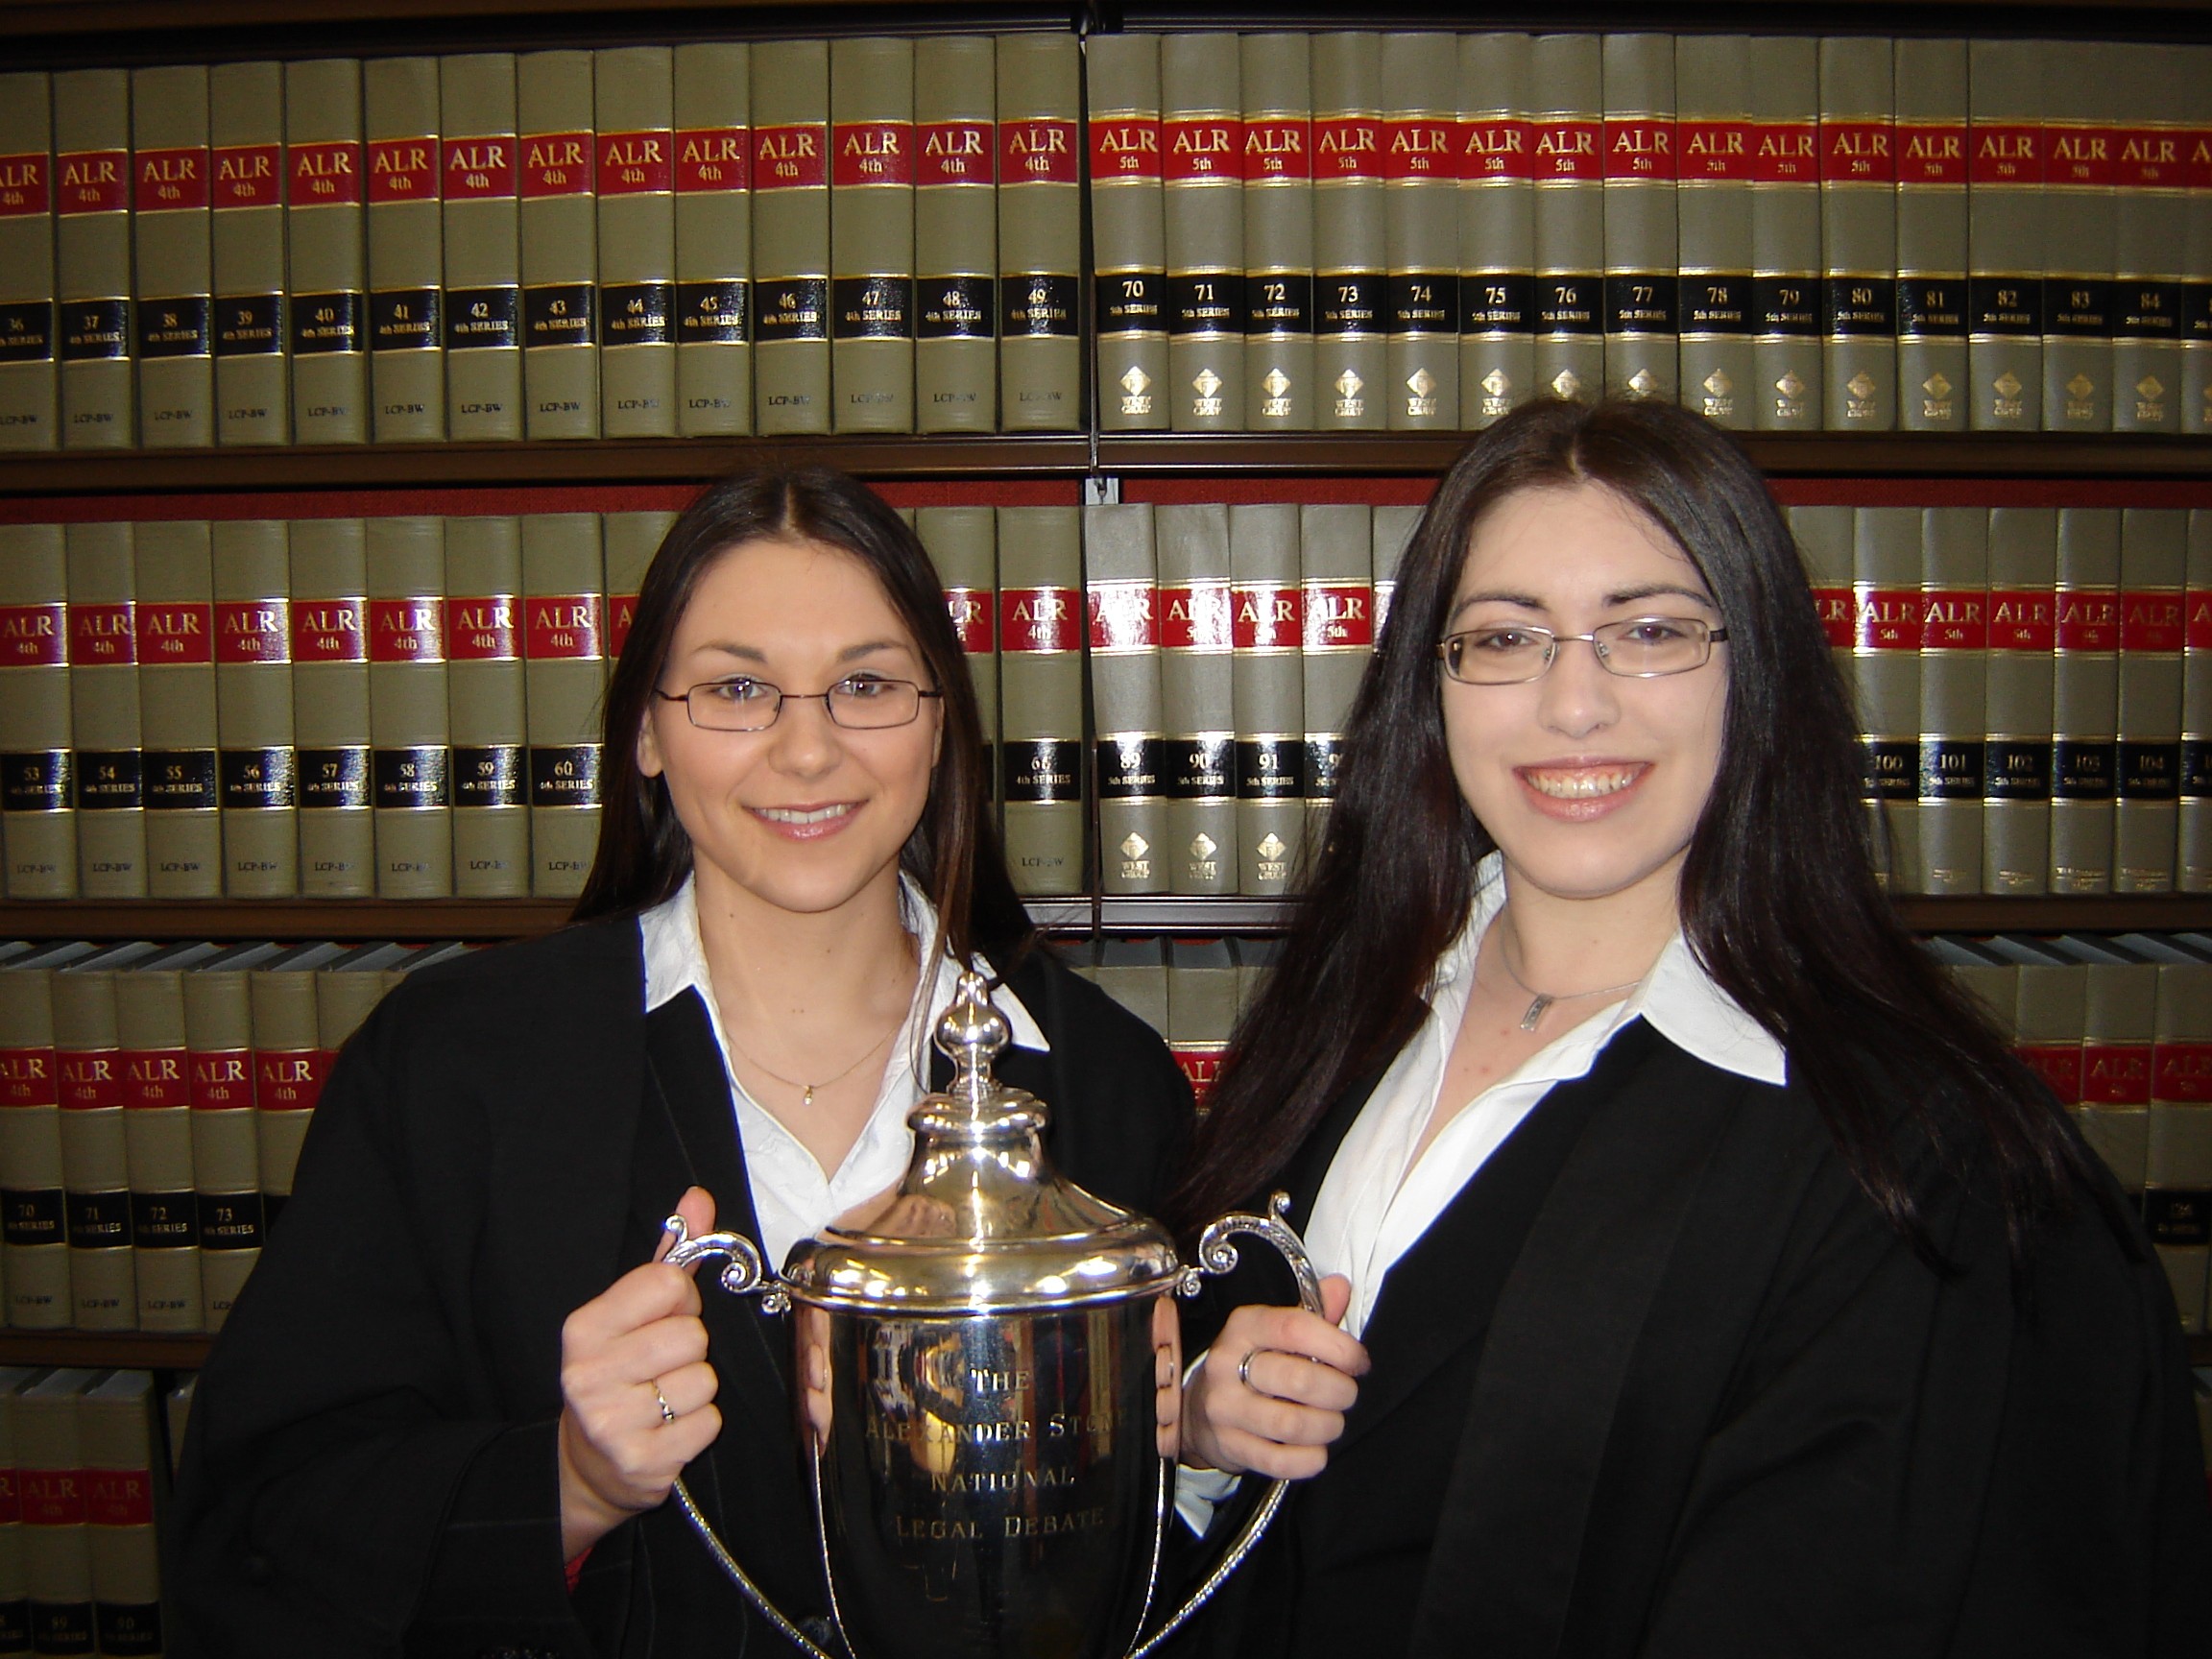 a photo of the winning moot students ((picture attached - left to right, Judith Pillans, Nicola McLaren)